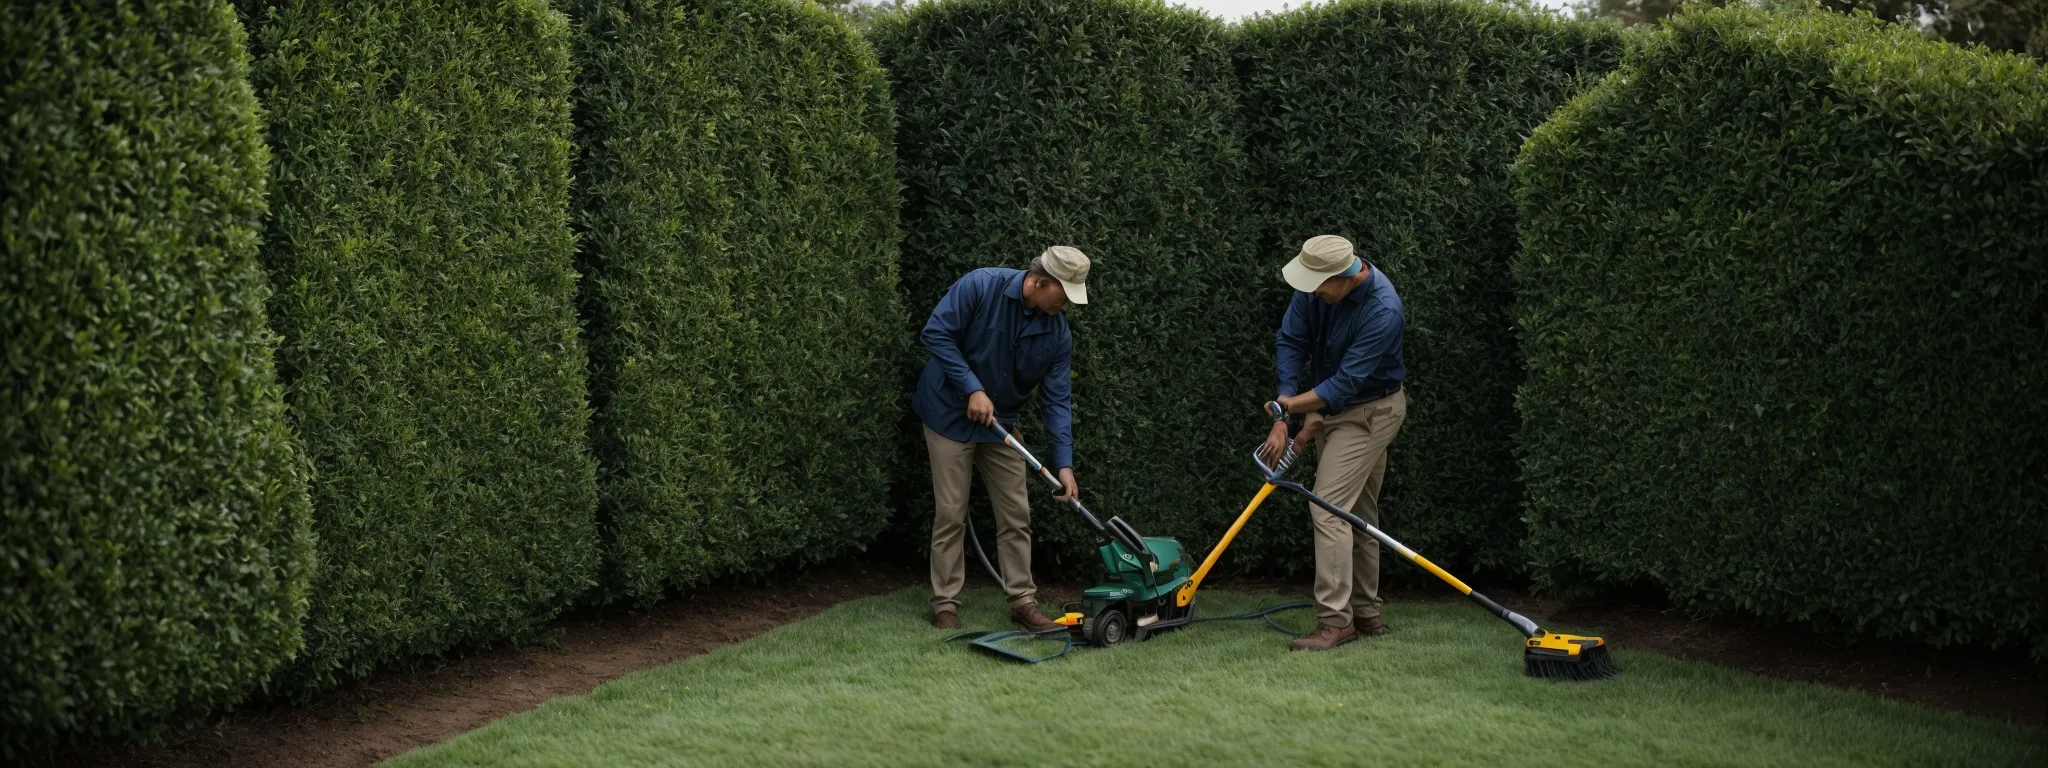 a gardener meticulously trims a lush hedge to shape its growth and enhance the garden's overall beauty.